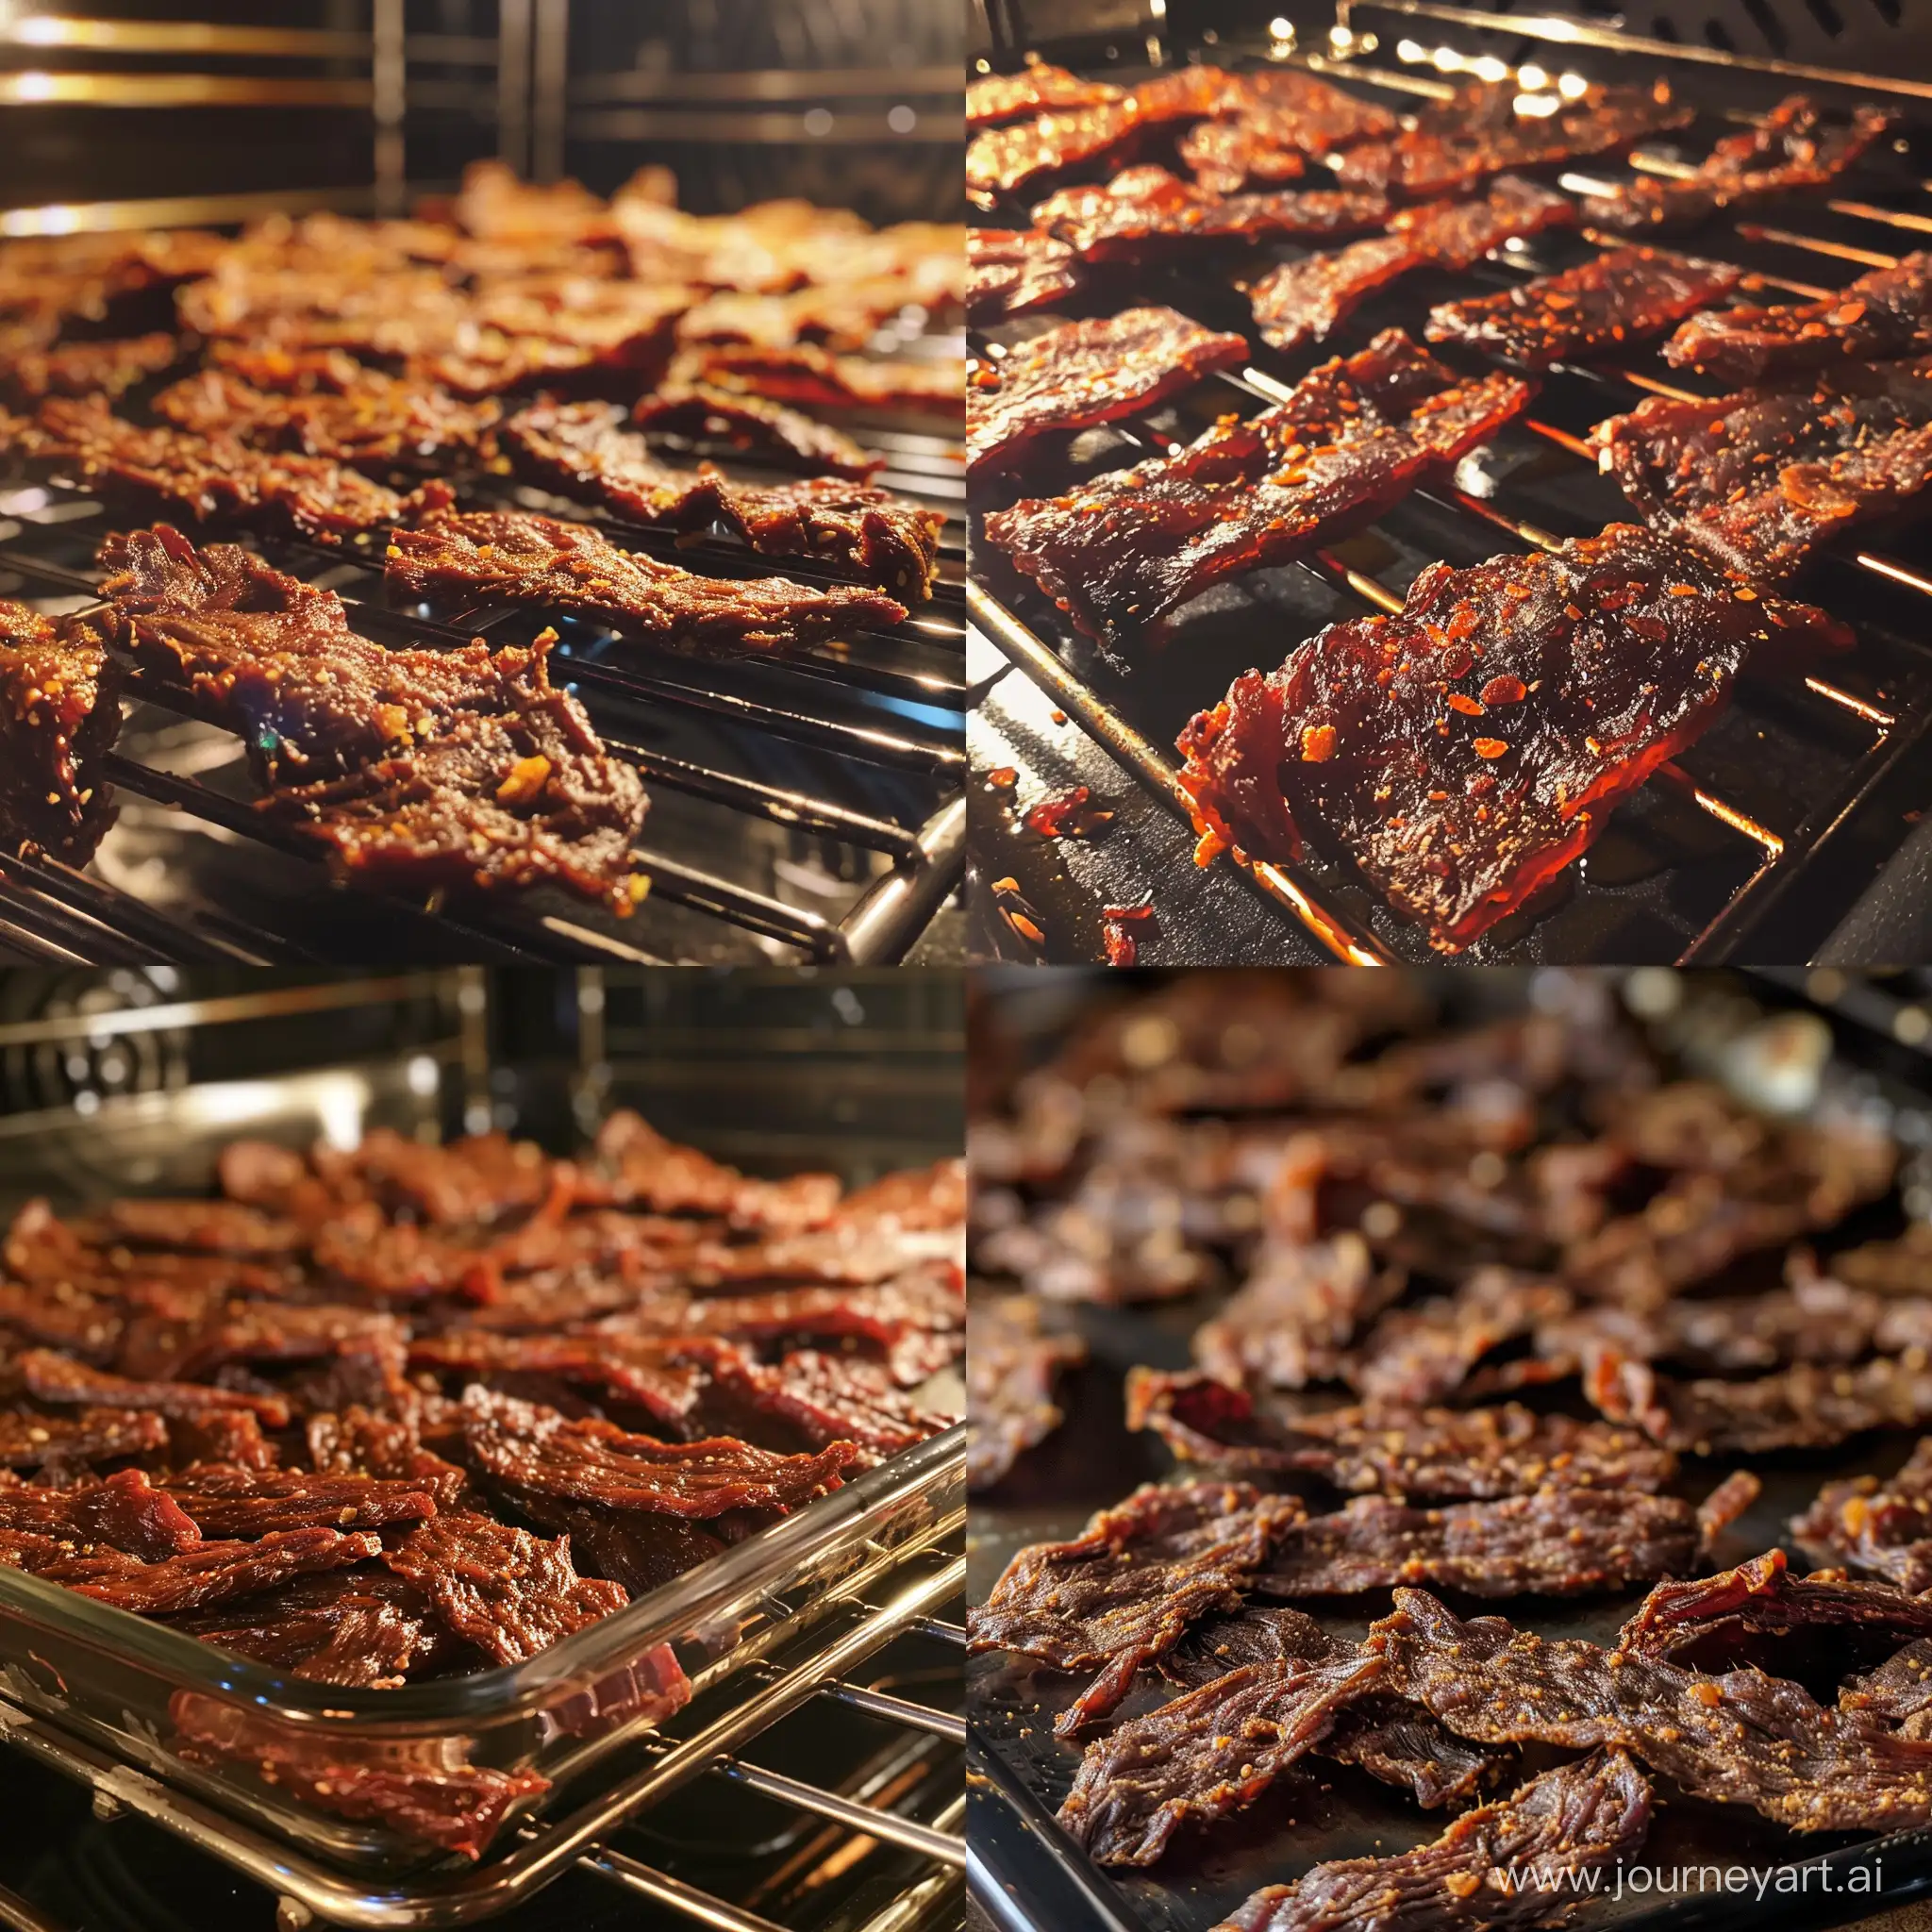 background of jerky close-up pic It’s in the oven. Almost Done. Sumptuous buffalo jerky- all natural. Just Meat and Spices.